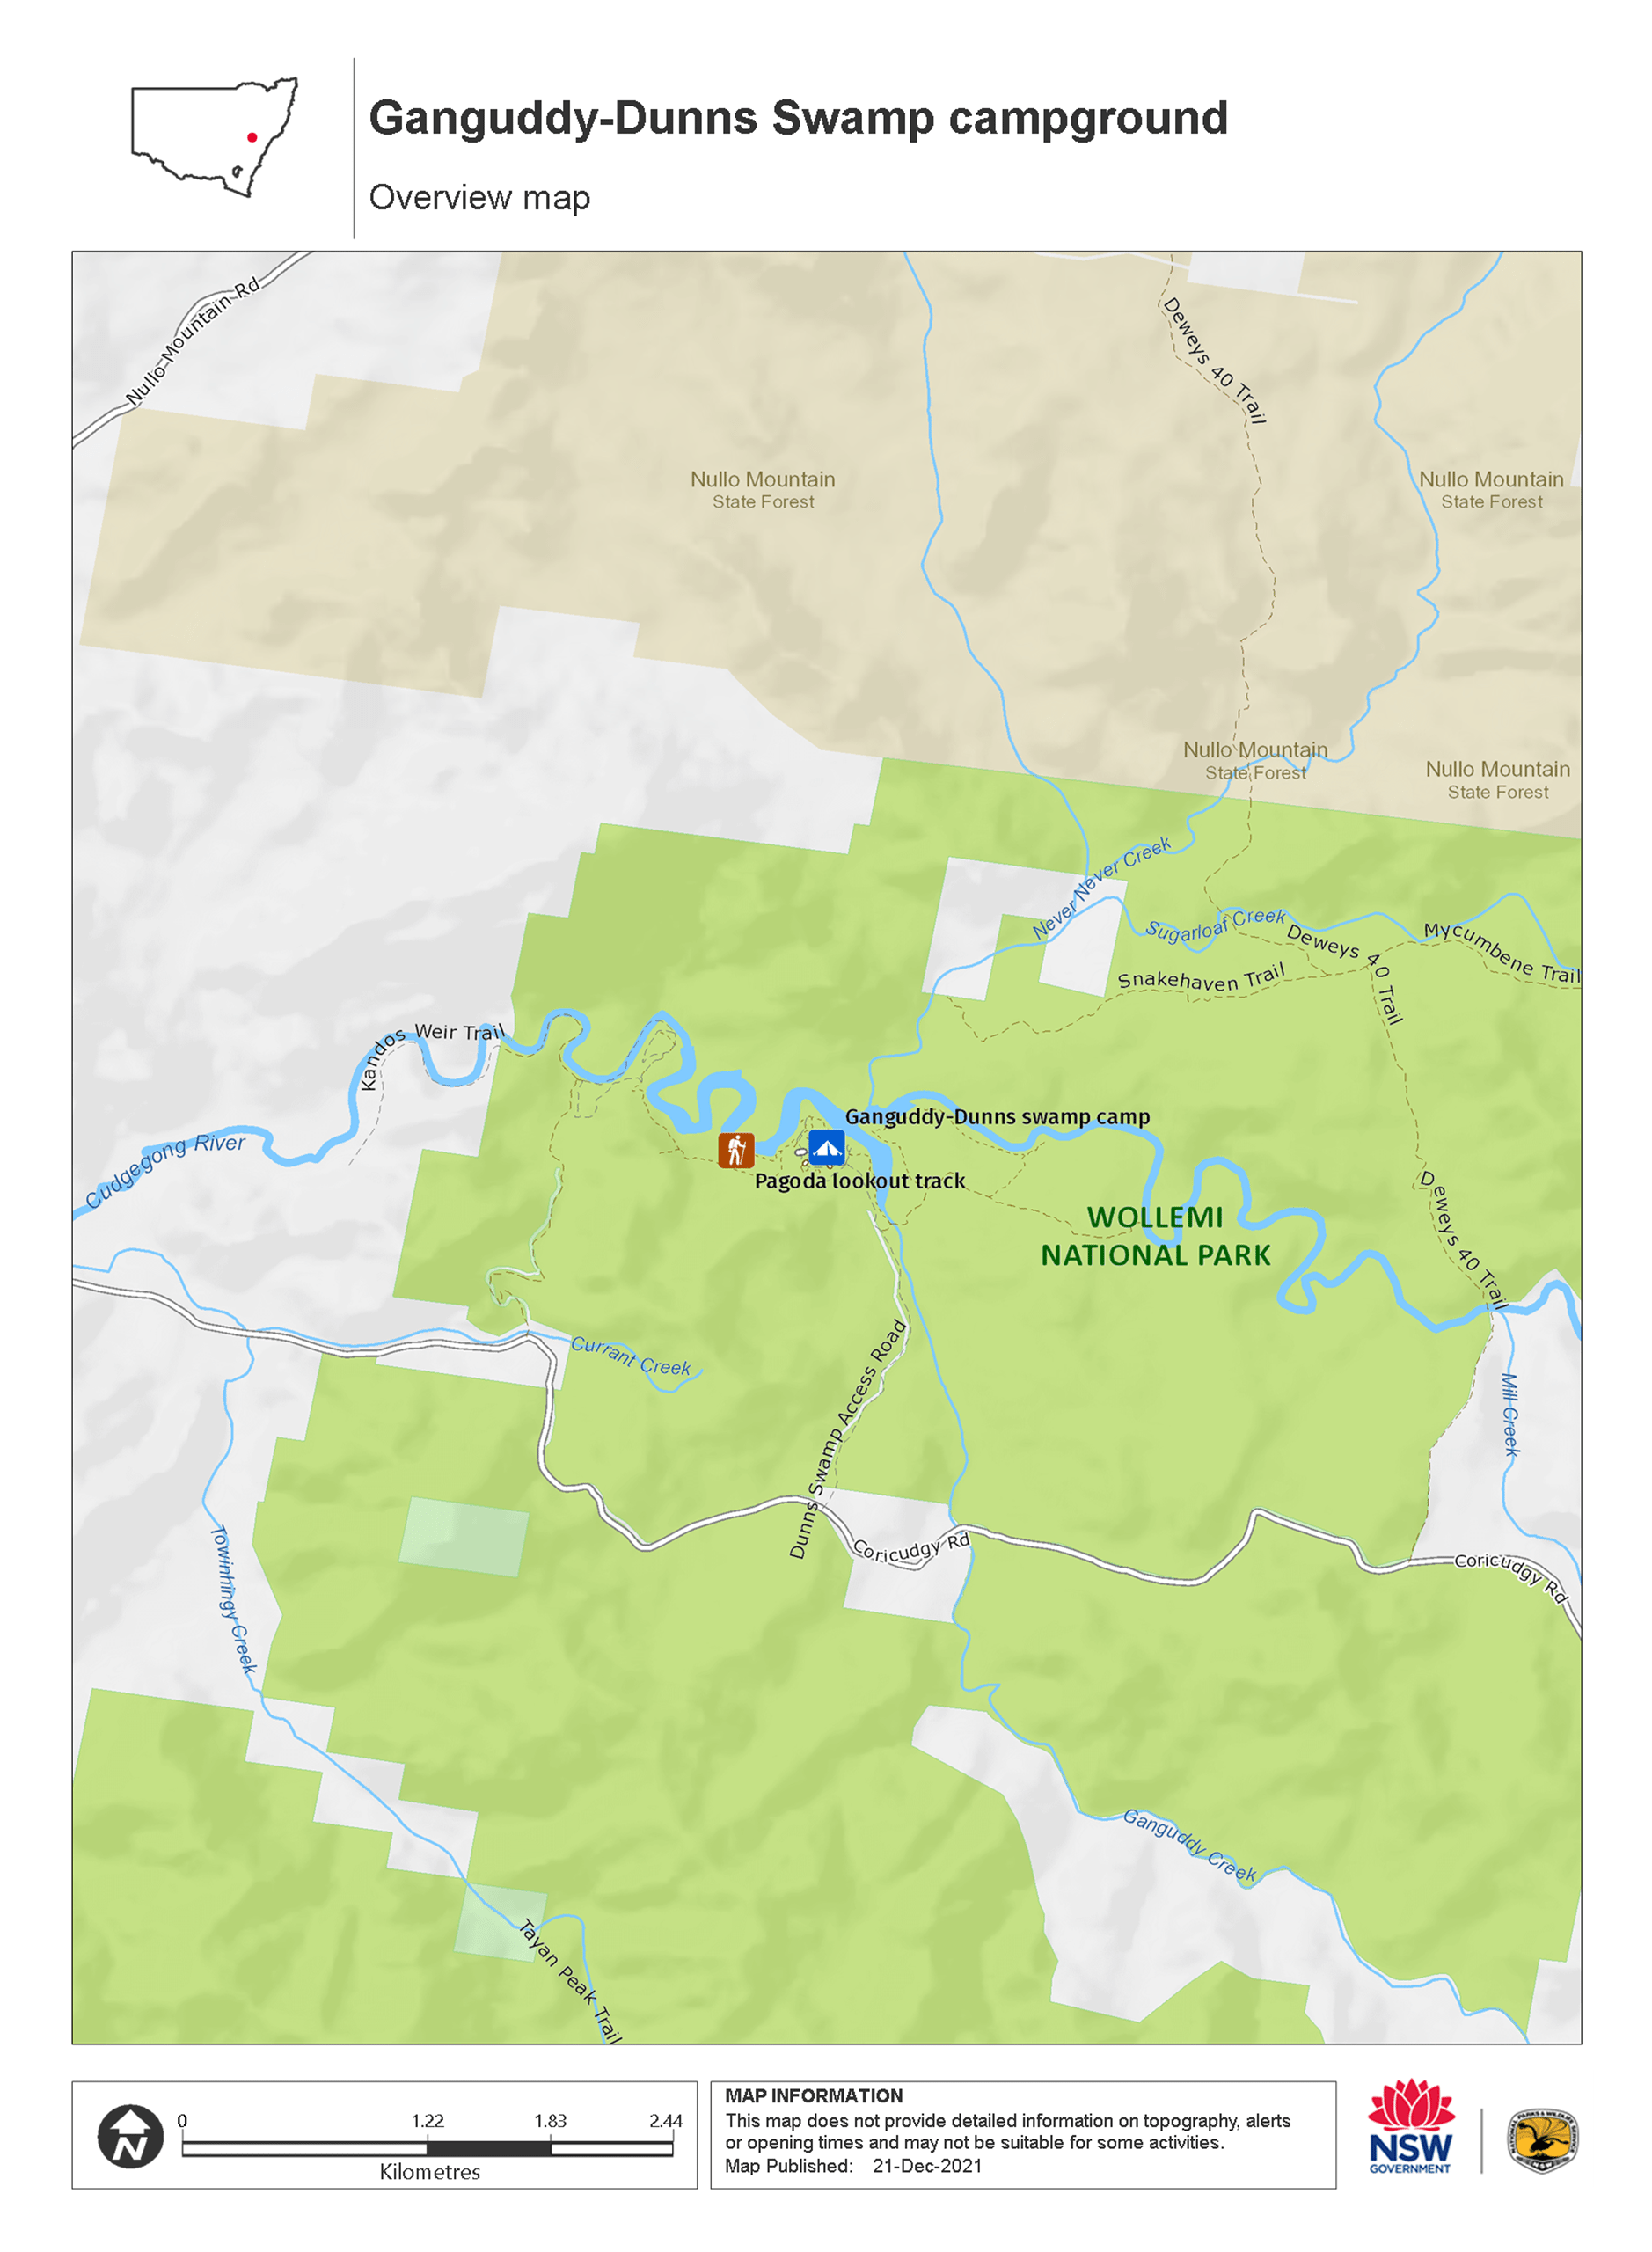 Ganguddy-Dunns Swamp campground - overview map